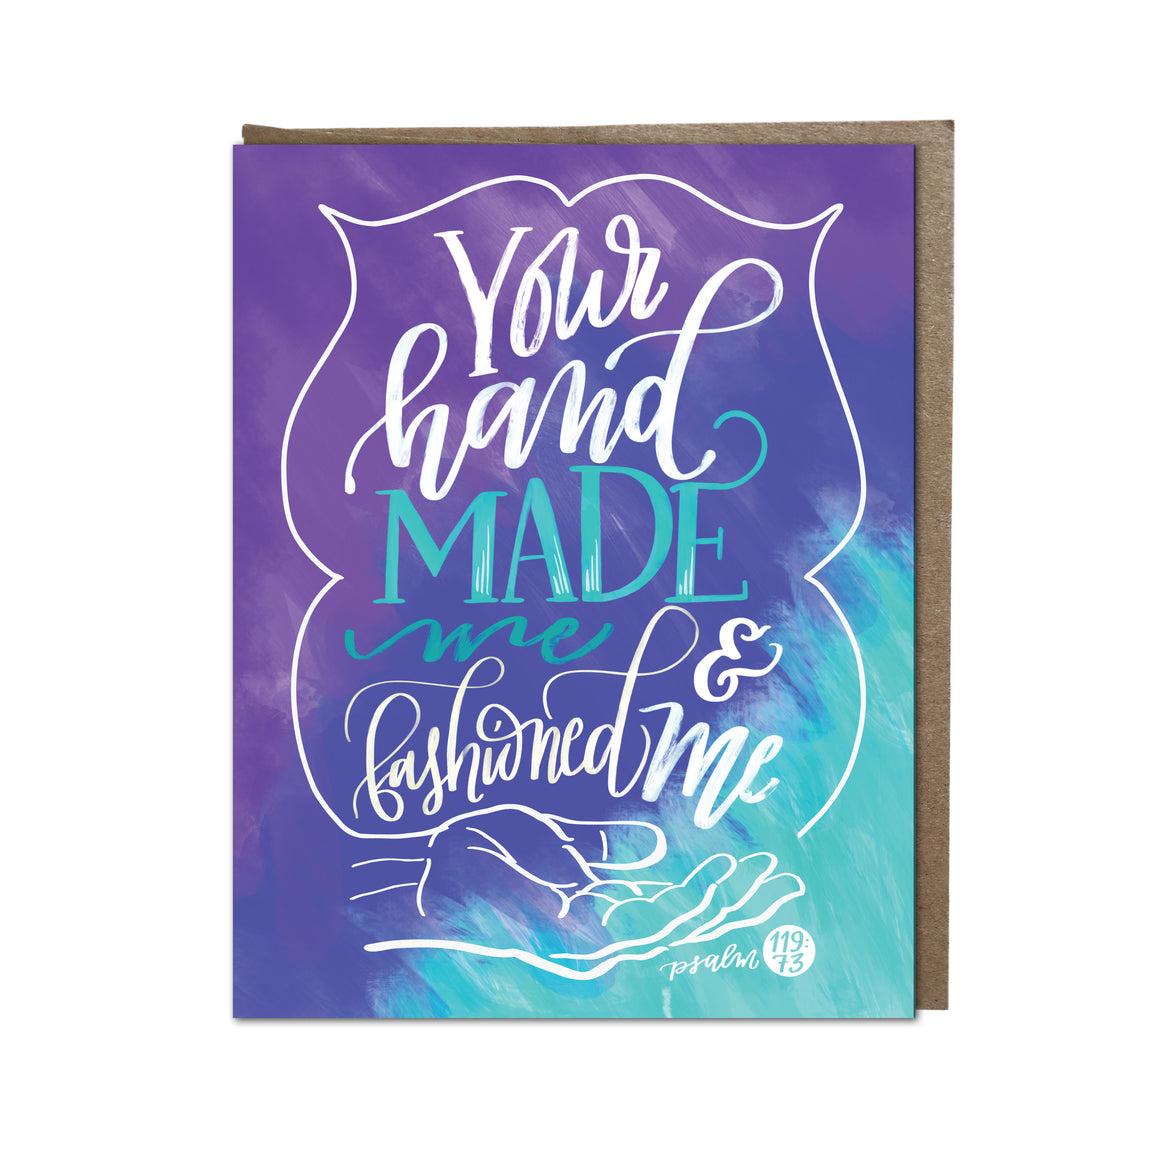 "Your Hand Made Me" card